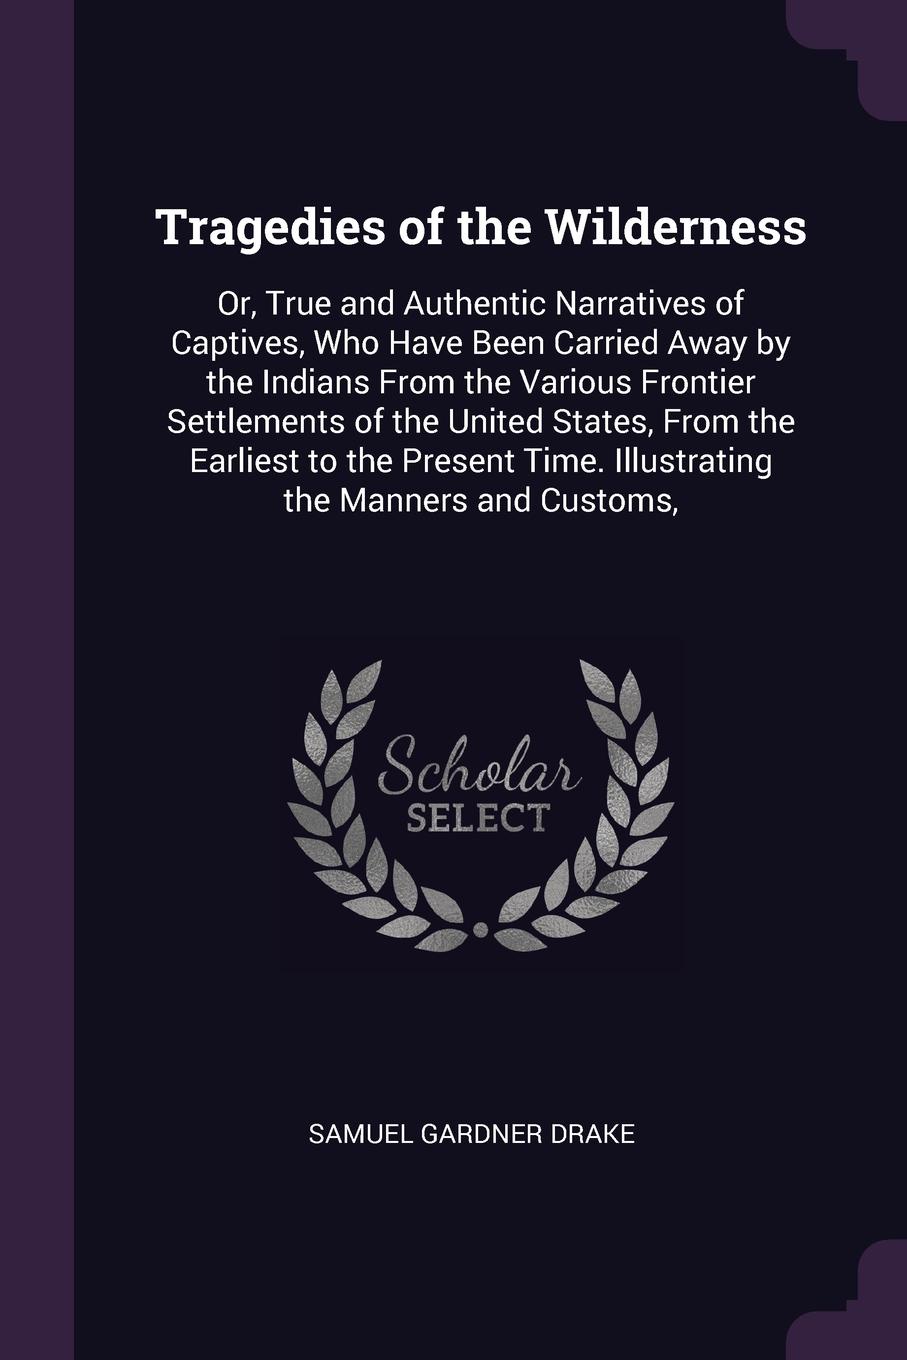 Tragedies of the Wilderness. Or, True and Authentic Narratives of Captives, Who Have Been Carried Away by the Indians From the Various Frontier Settlements of the United States, From the Earliest to the Present Time. Illustrating the Manners and C...